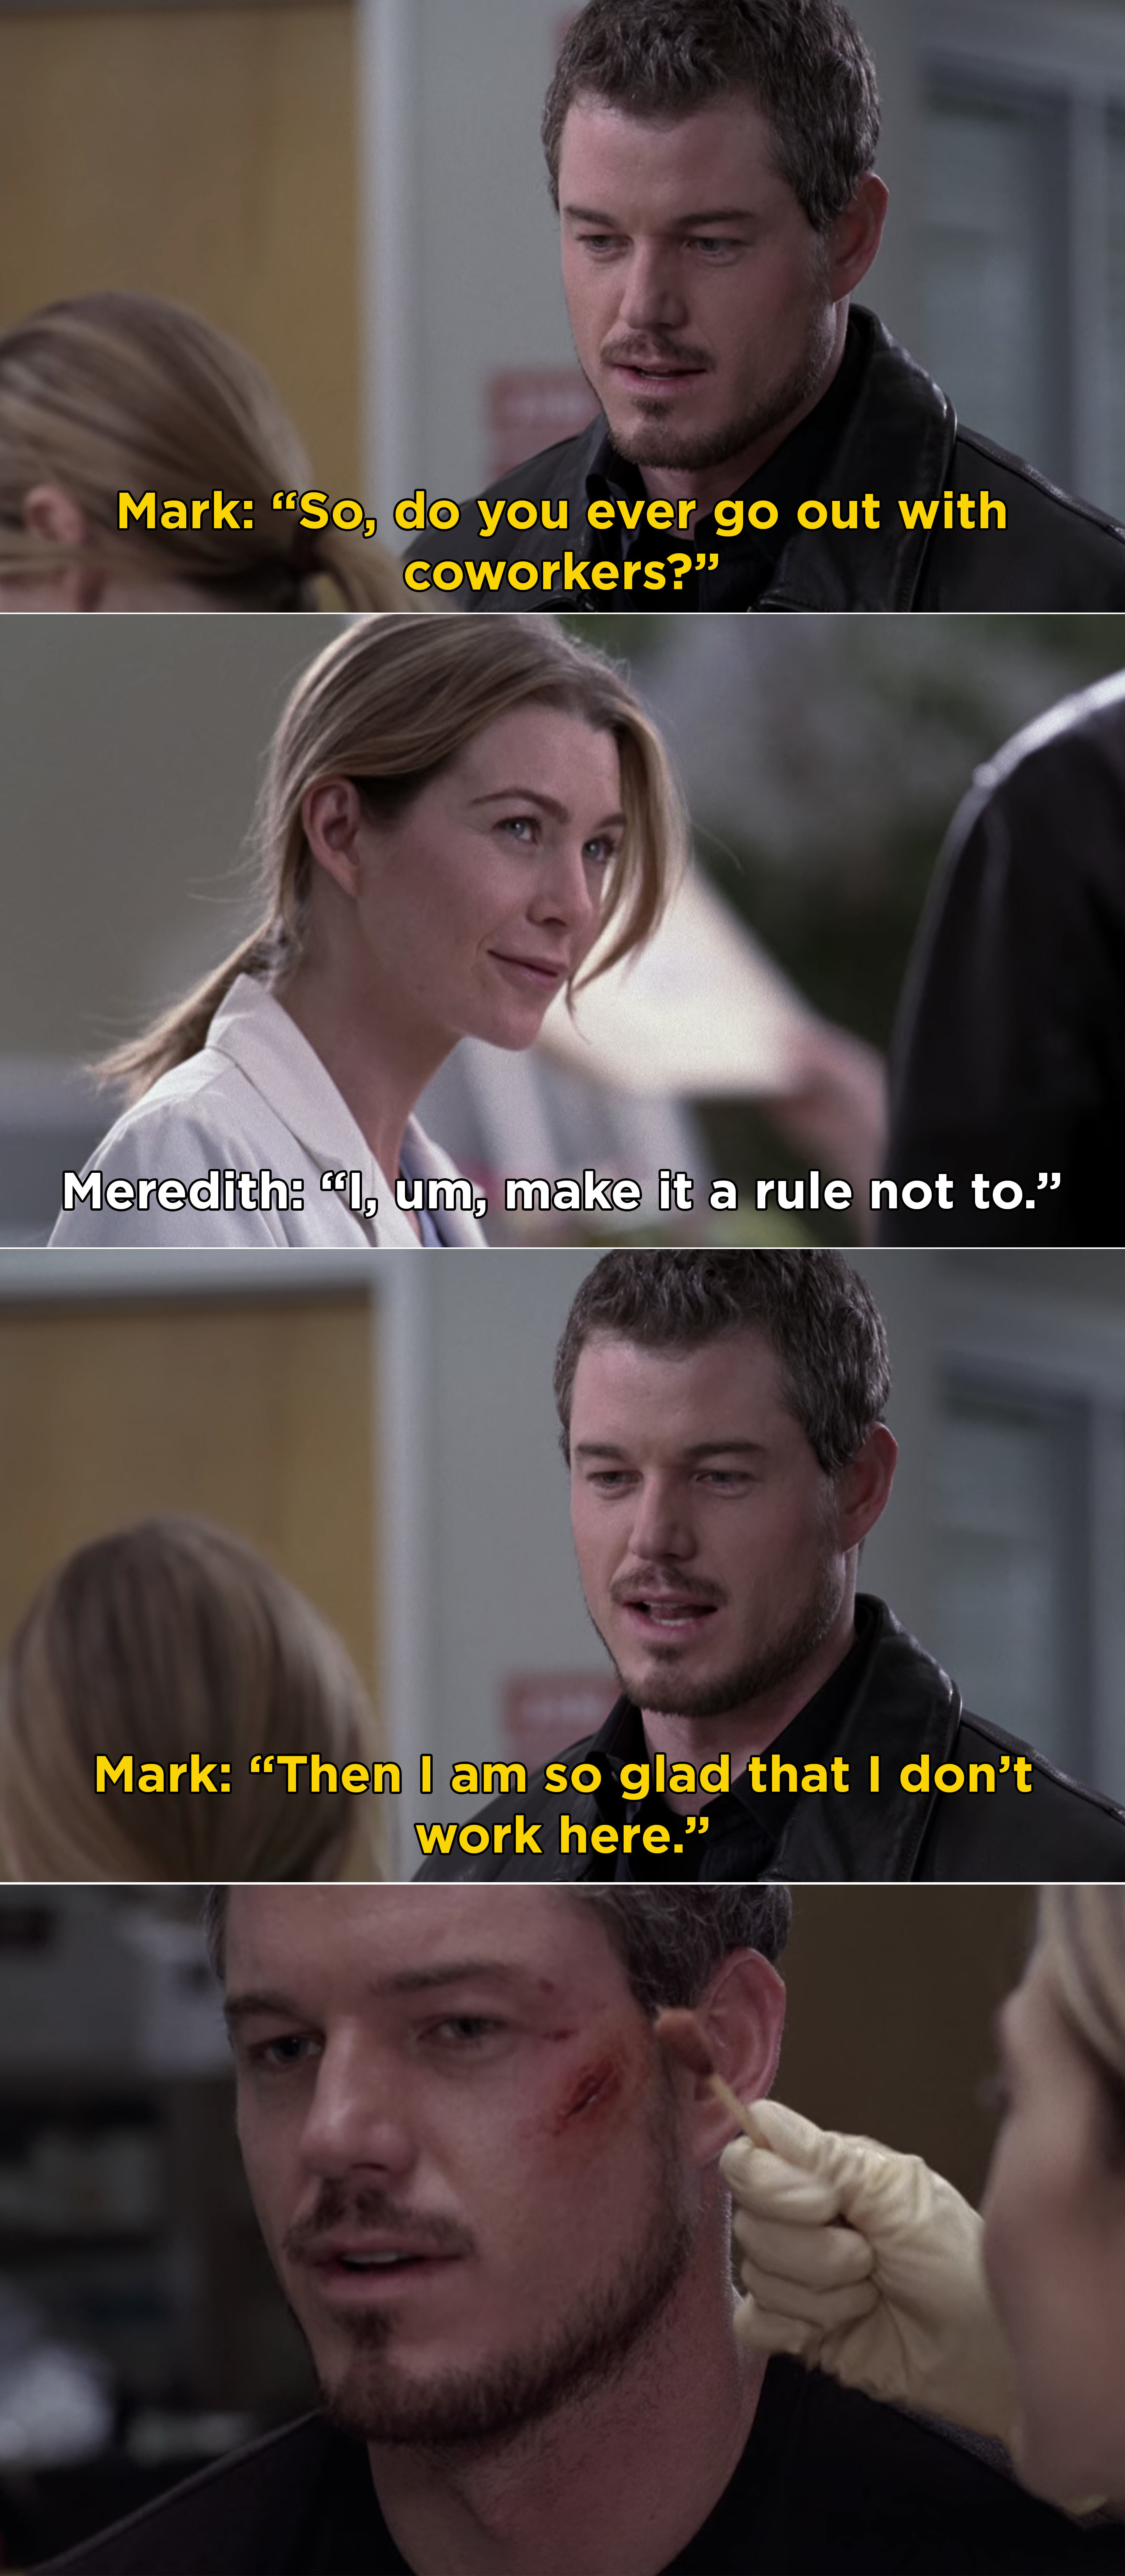 Mark asking Meredith if she ever dates coworkers